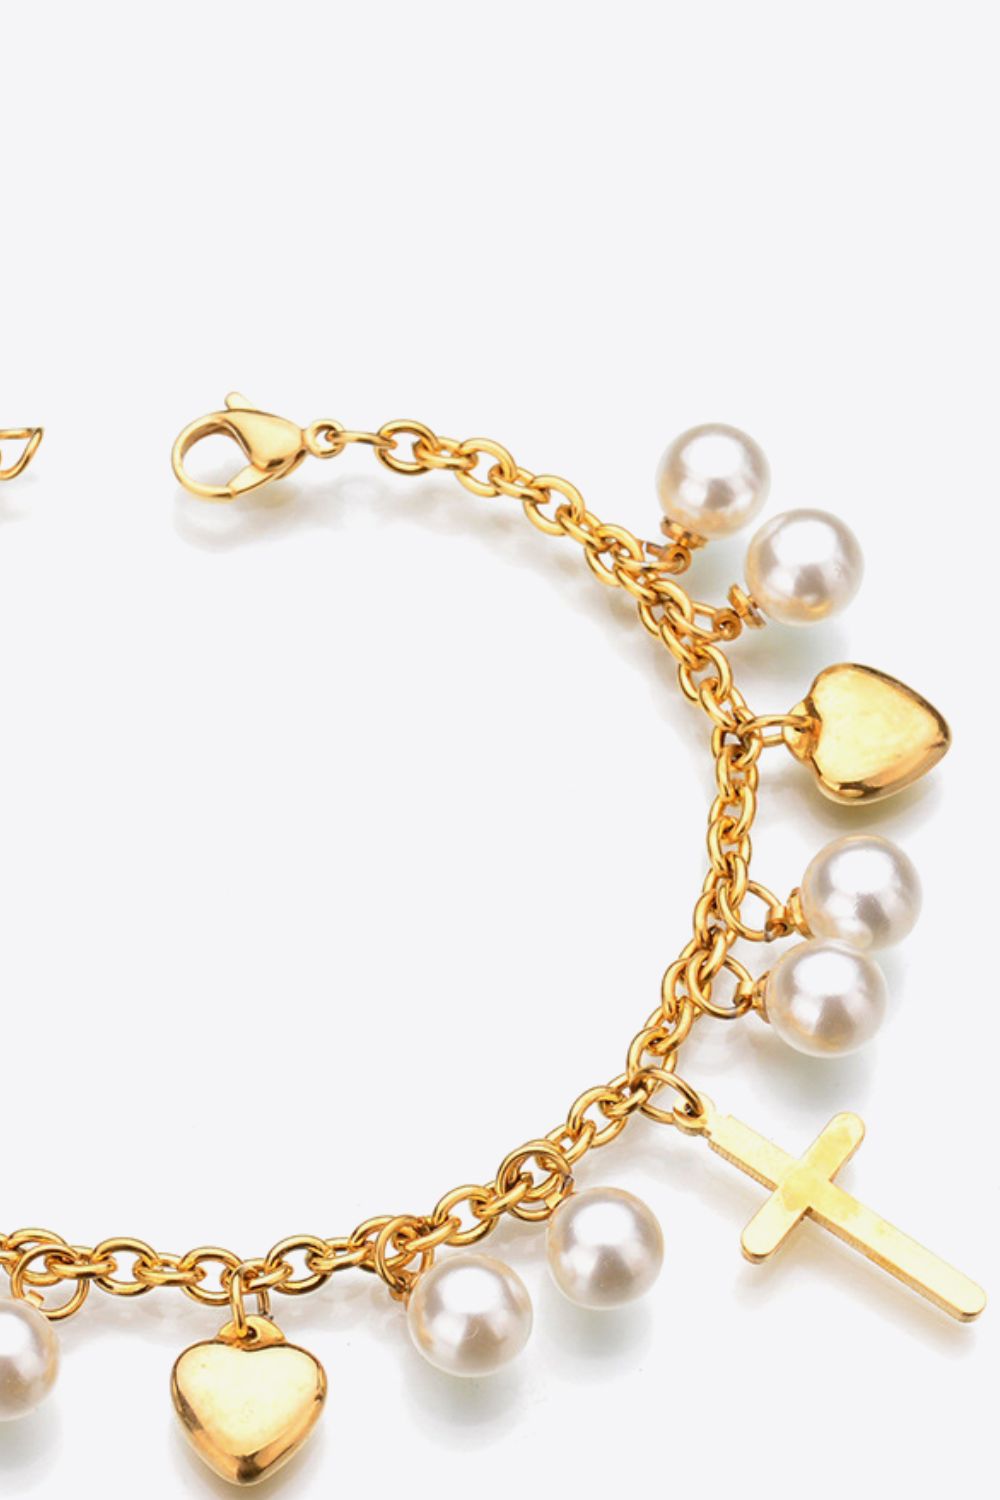 Heart Cross and Pearl Charm Stainless Steel Bracelet - Gold / One Size - T-Shirts - Bracelets - 3 - 2024